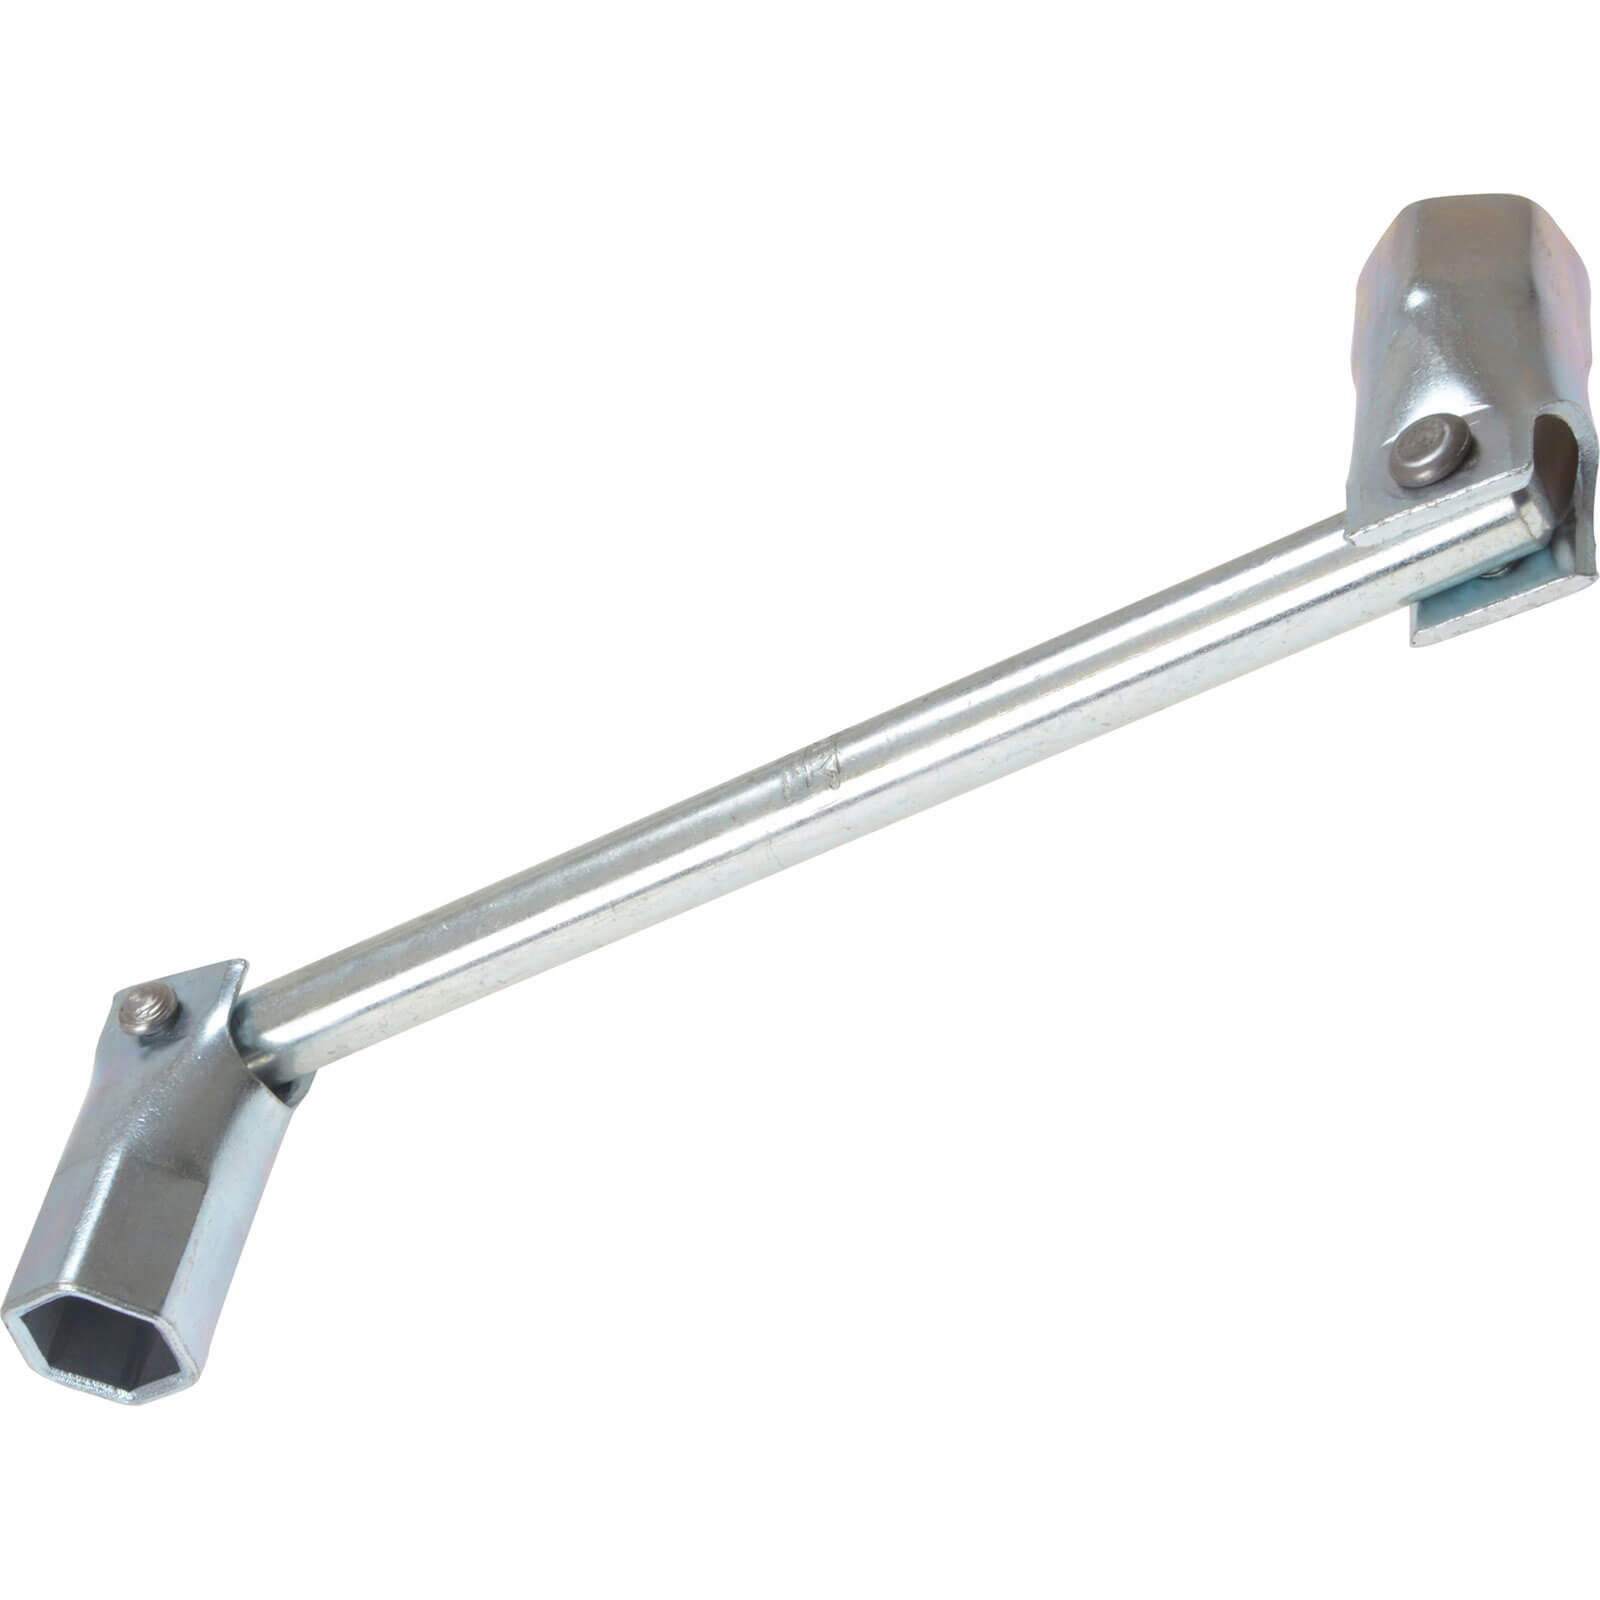 Image of Priory 310 Double Ended Scaffold Spanner Whit 7/16" x 1/2" Round Steel Socket